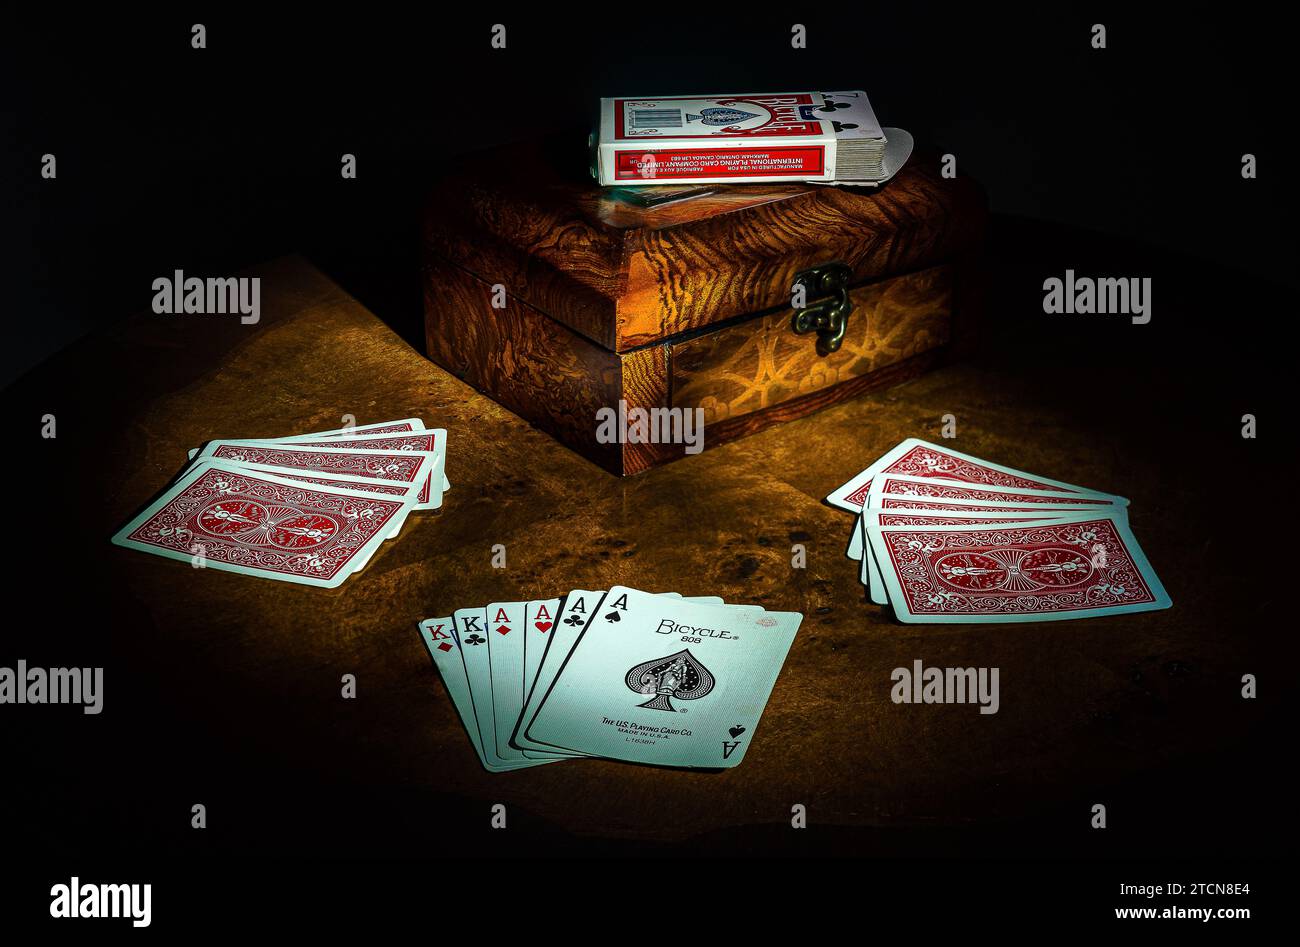 Poker - a card game, usually played with one deck of 52 cards, the aim of which is to win money from other participants by completing the best hand. Stock Photo